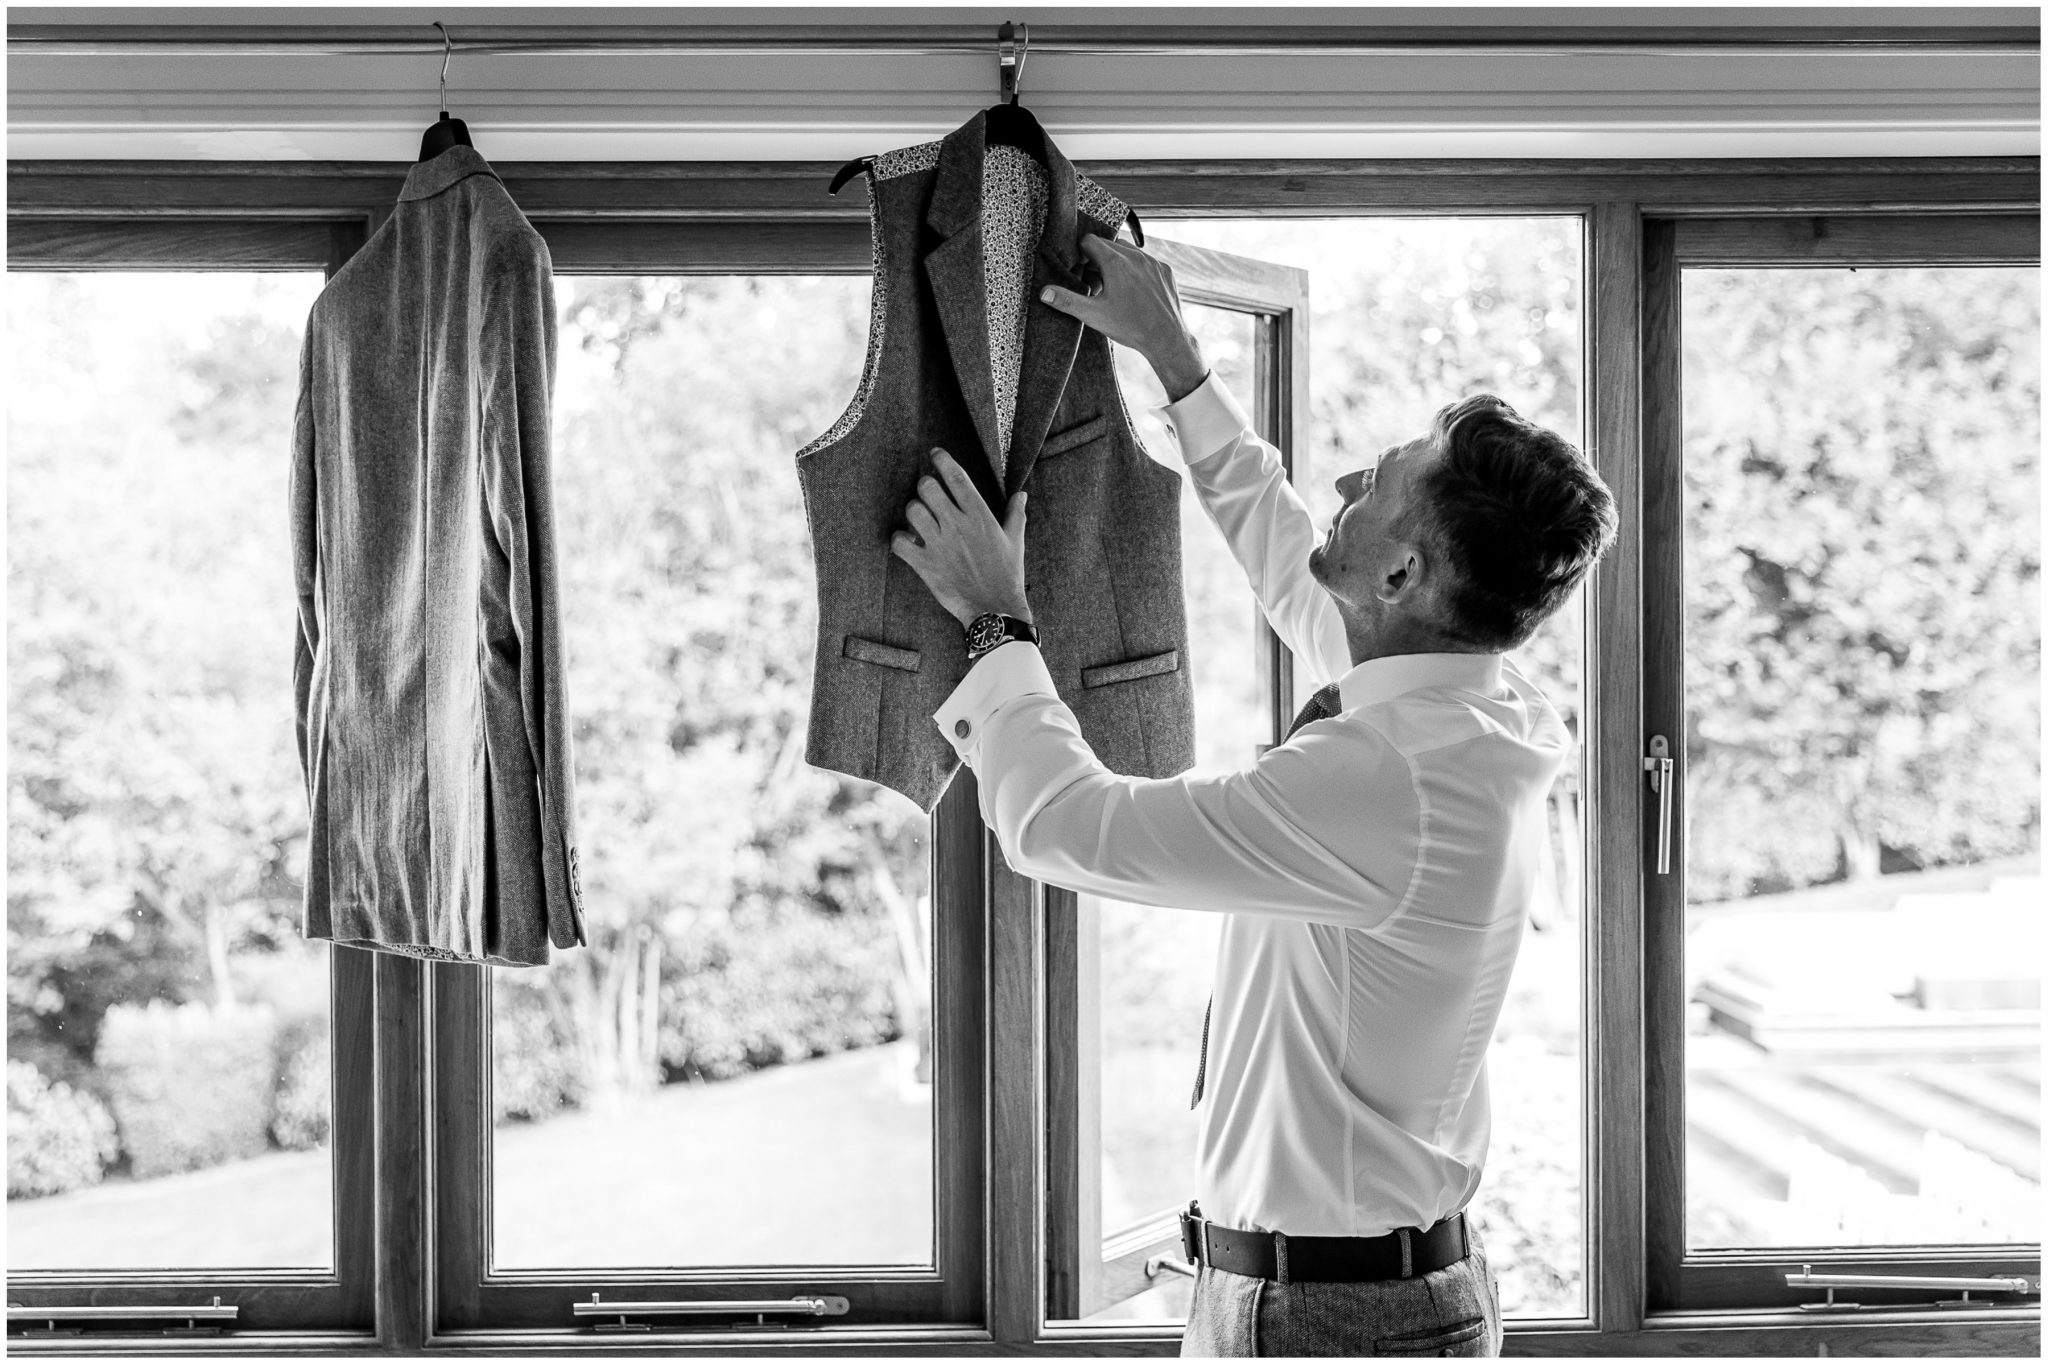 The groom reaches for his waistcoat